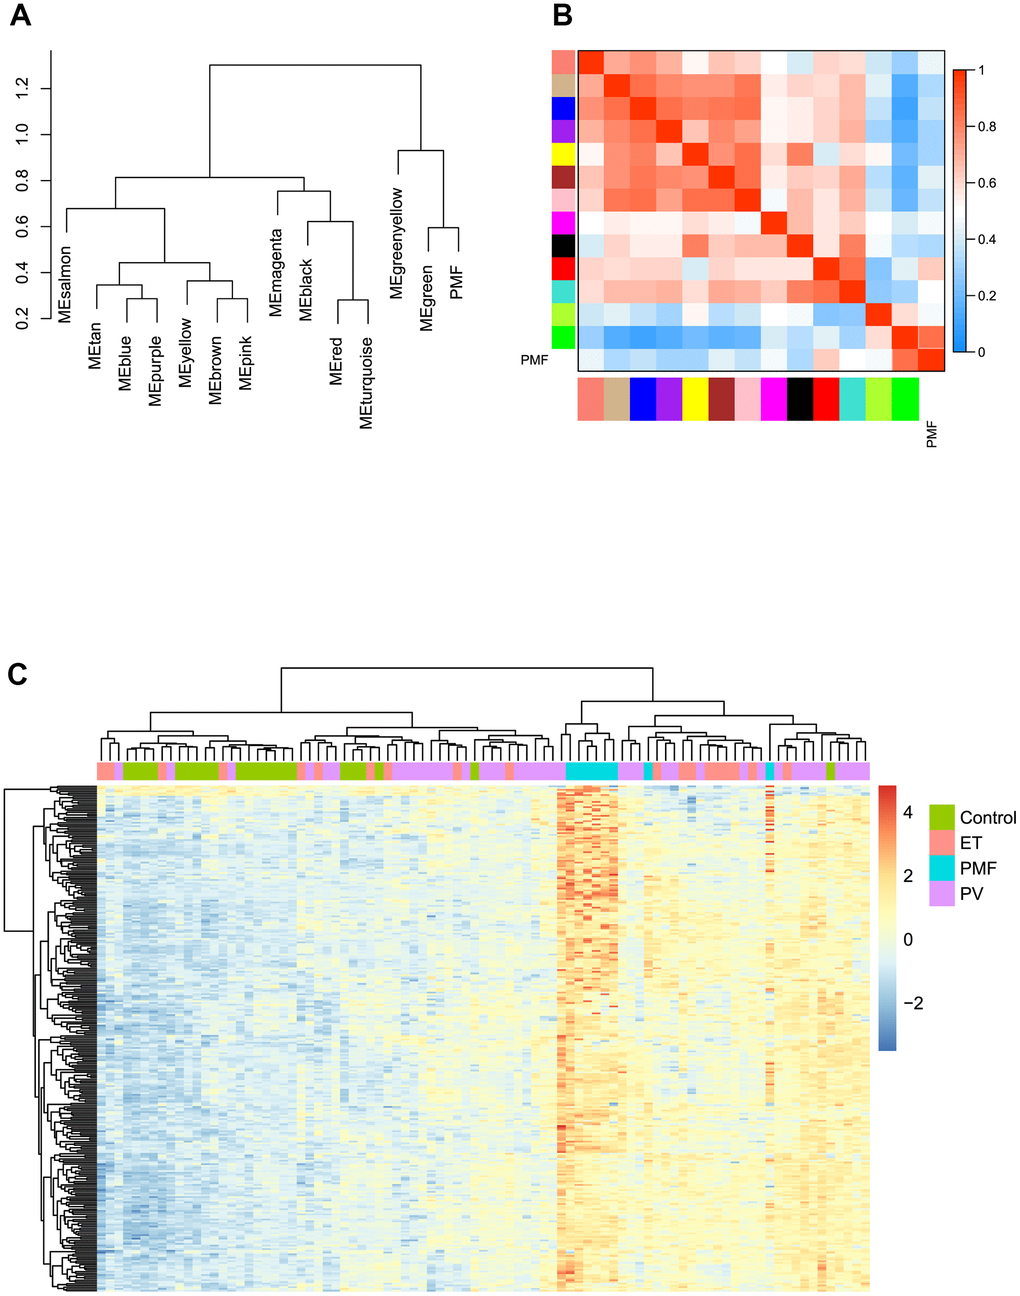 (A) The cluster dendrogram of adjacencies in the eigengene network. (B) The heat map of adjacencies in the eigengene network. Blue represented a negative correlation, while red represented a positive correlation. (C) Green module genes expression heat map of different groups (Control, ET, PV and PMF).